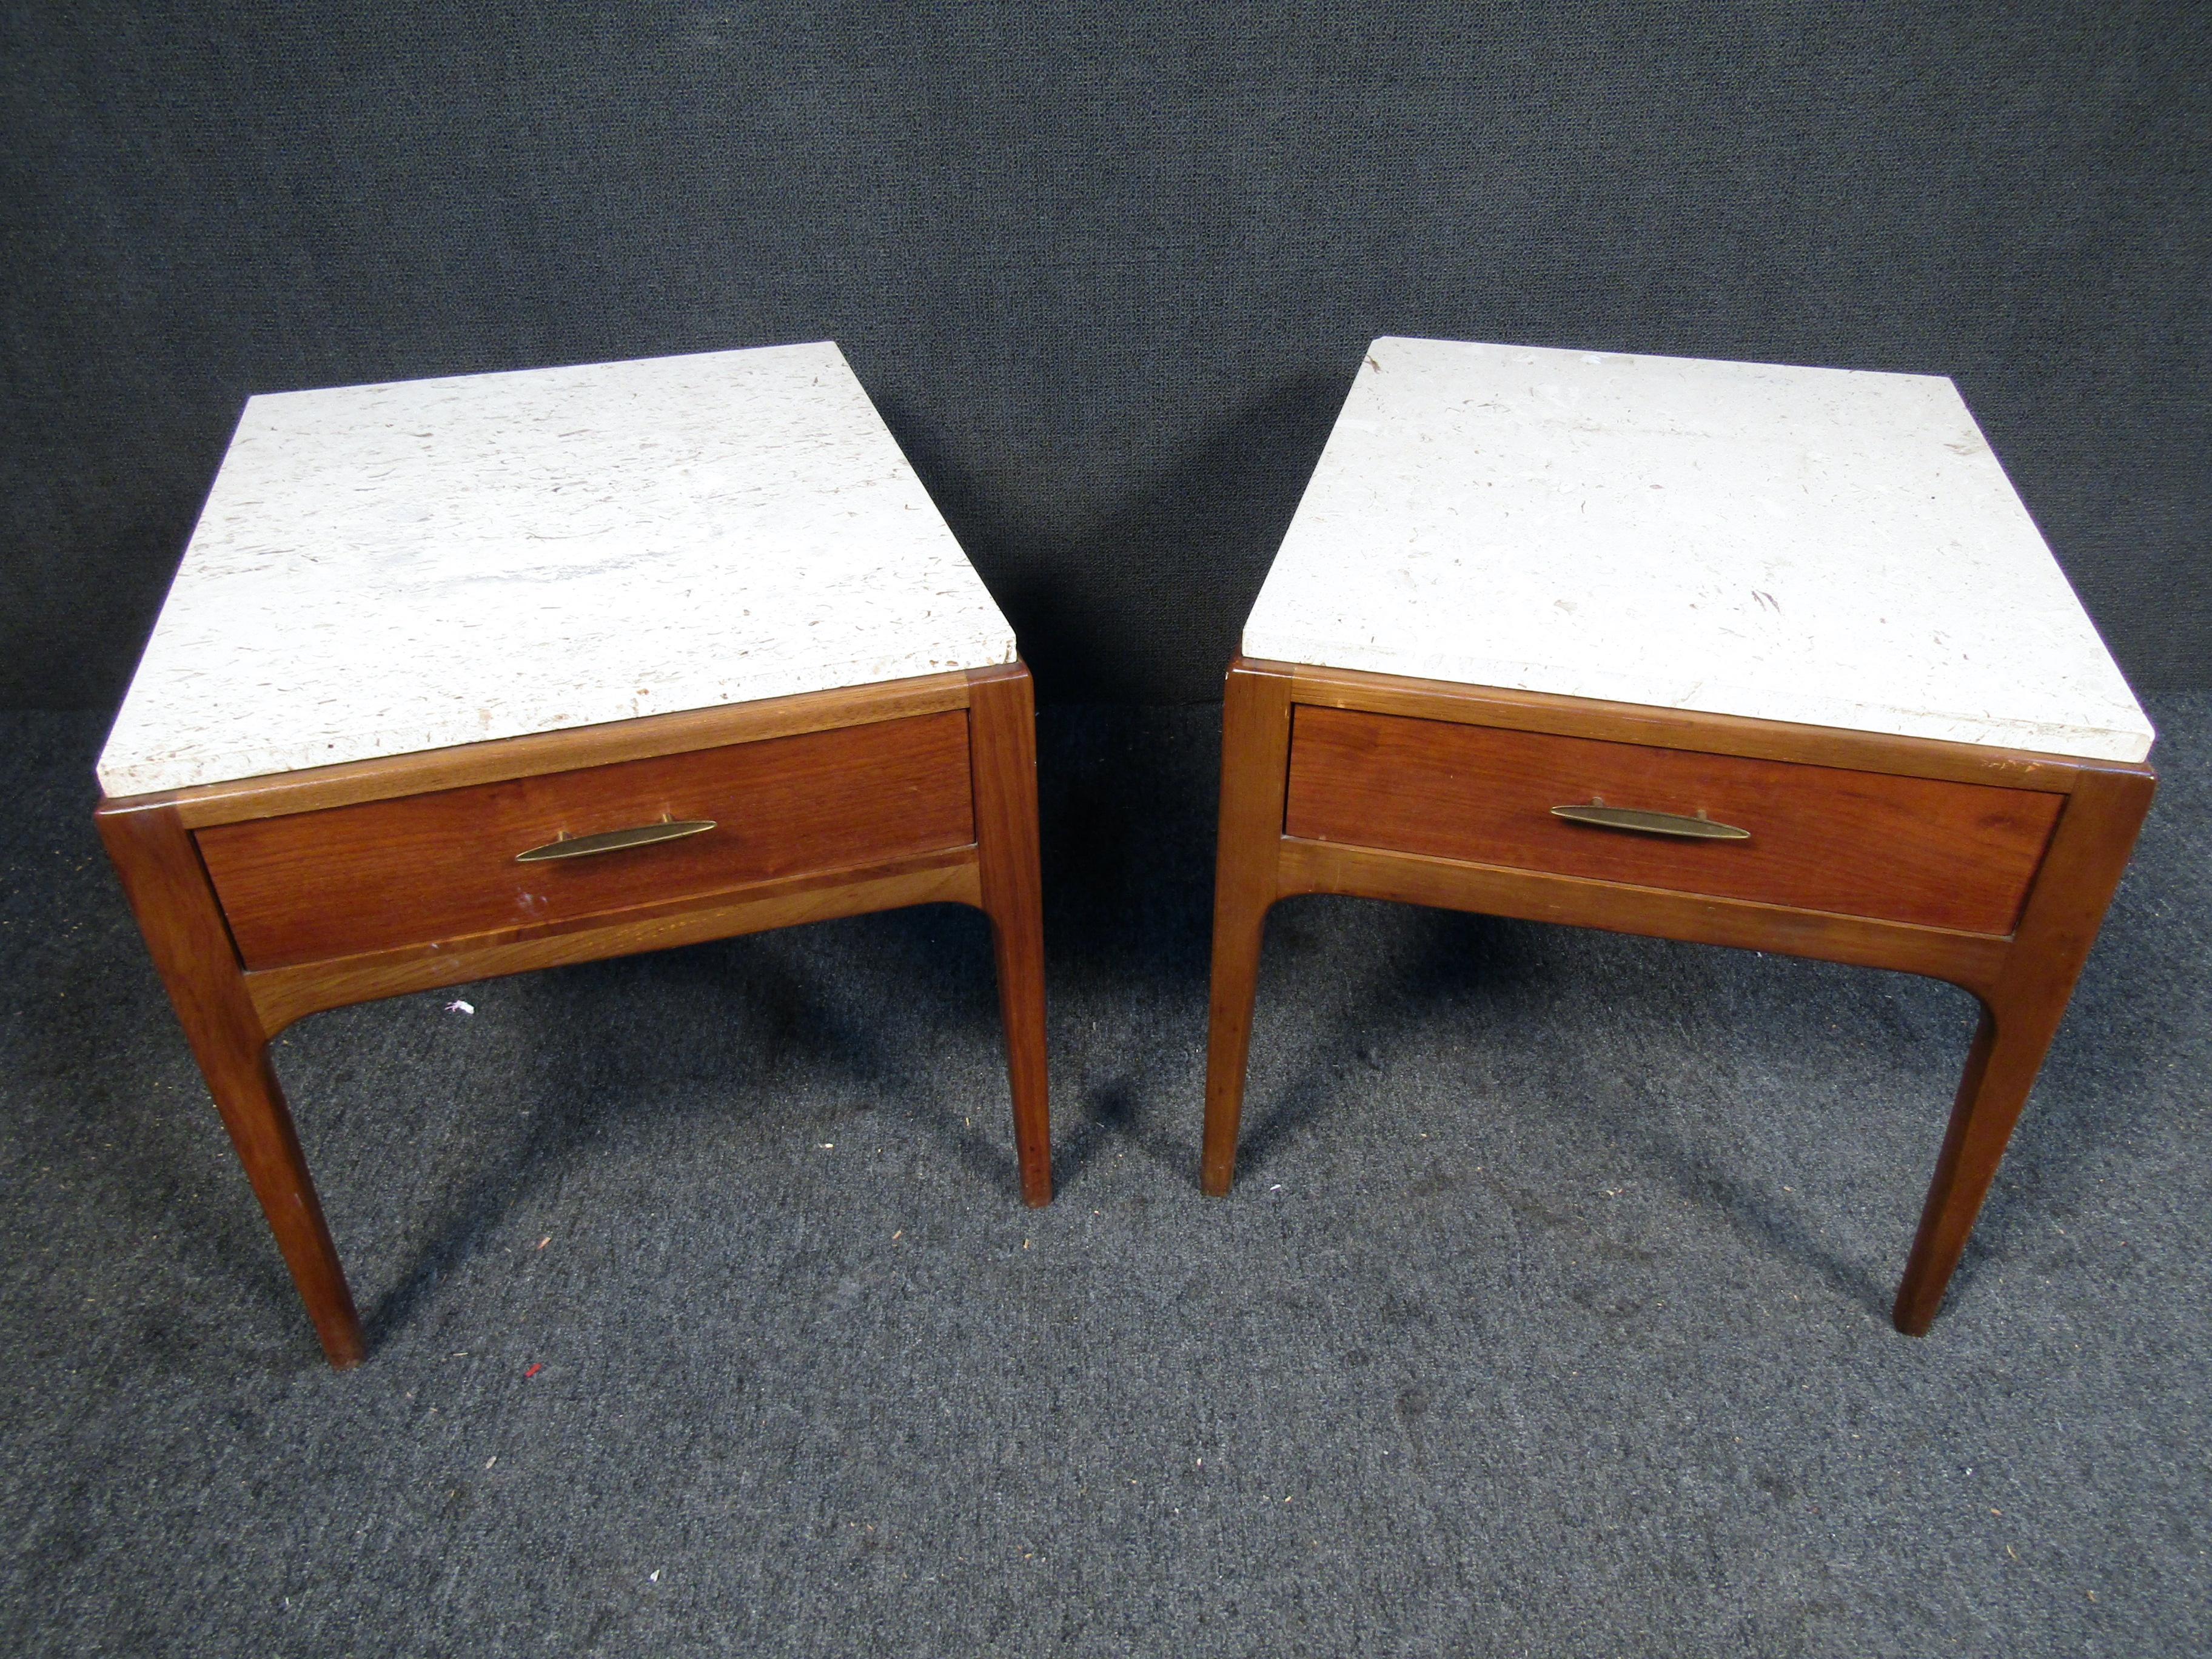 This pair of vintage Lane nightstands features Rectangular marble tops and a sleek walnut construction with one drawer per piece. These nightstands will make a great addition to your living or office space. Please confirm item location (NJ or NY).